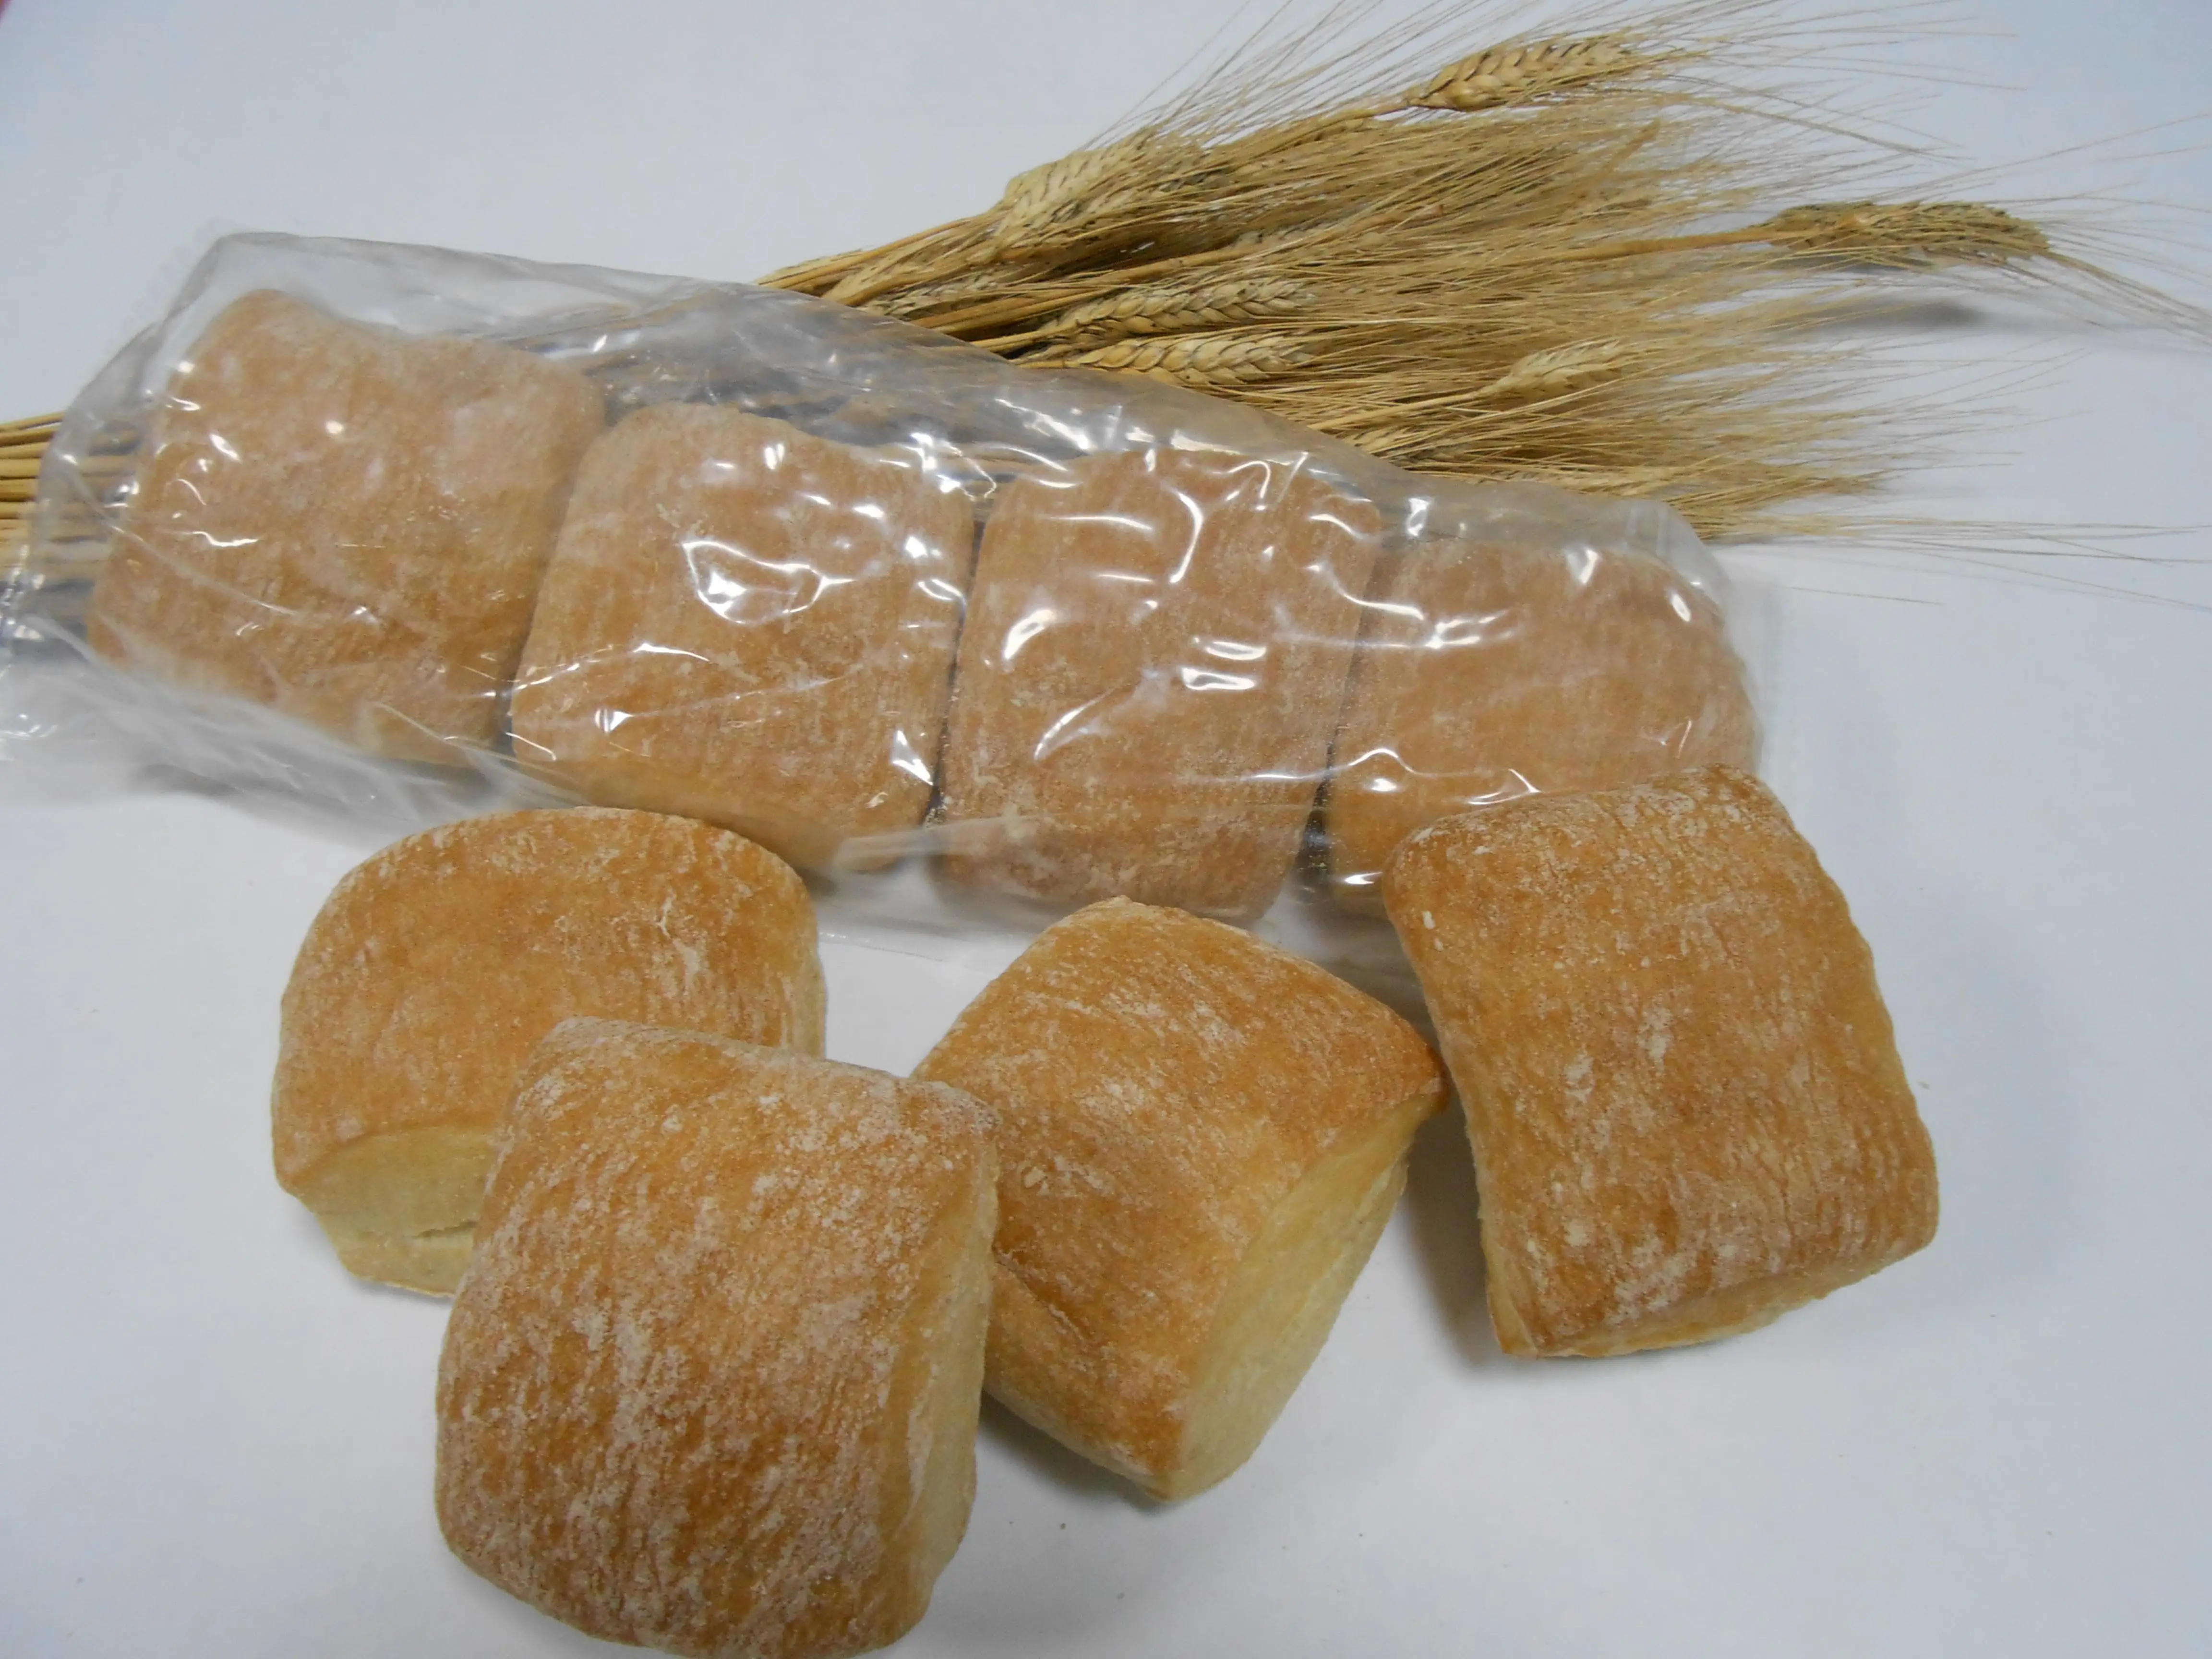 PREMIUM QUALITY ITALIAN WHEAT BREAD WITH LOW GLYCEMIC INDEX AND HIGH FIBRE, WITH EXTRA VIRGIN OLIVE OIL